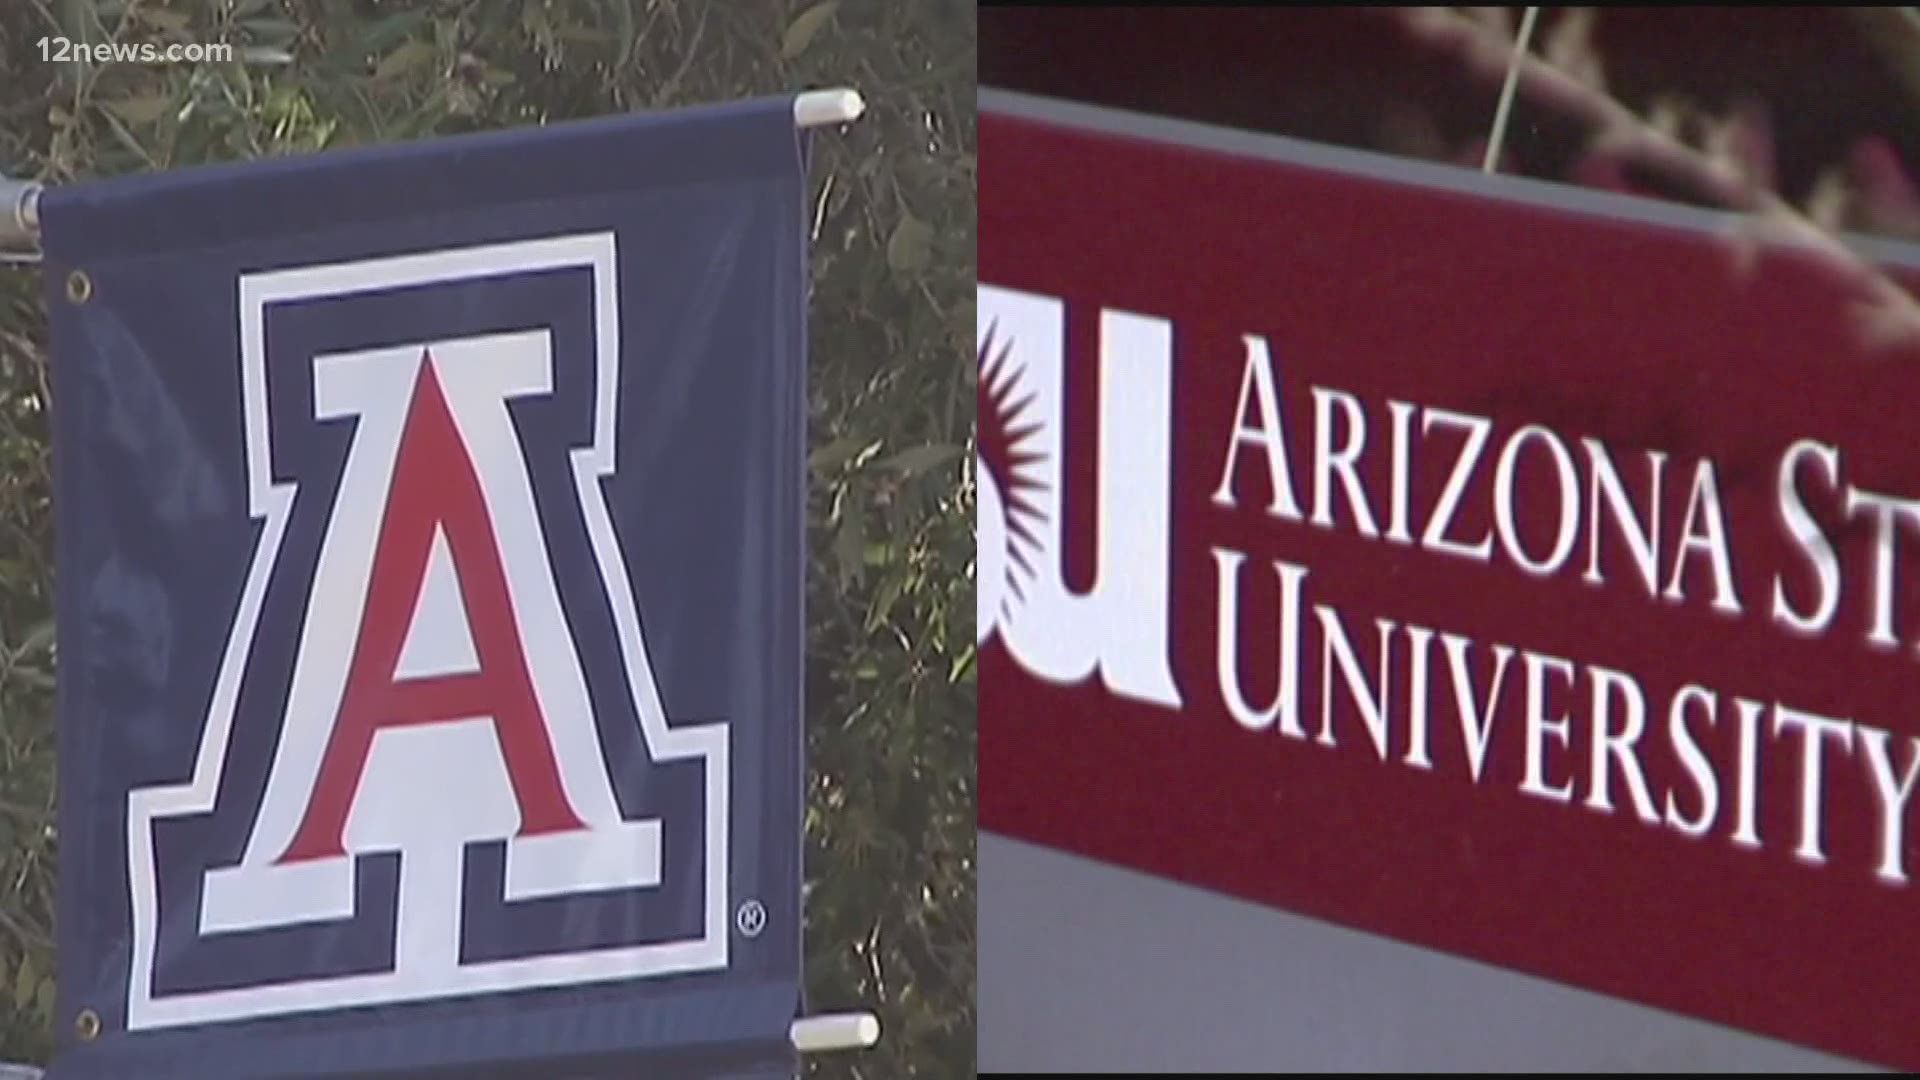 ASU and UArizona announced that school will resume with in-person classes starting this fall. The schools said plans are subject to change based on CDC guidelines.